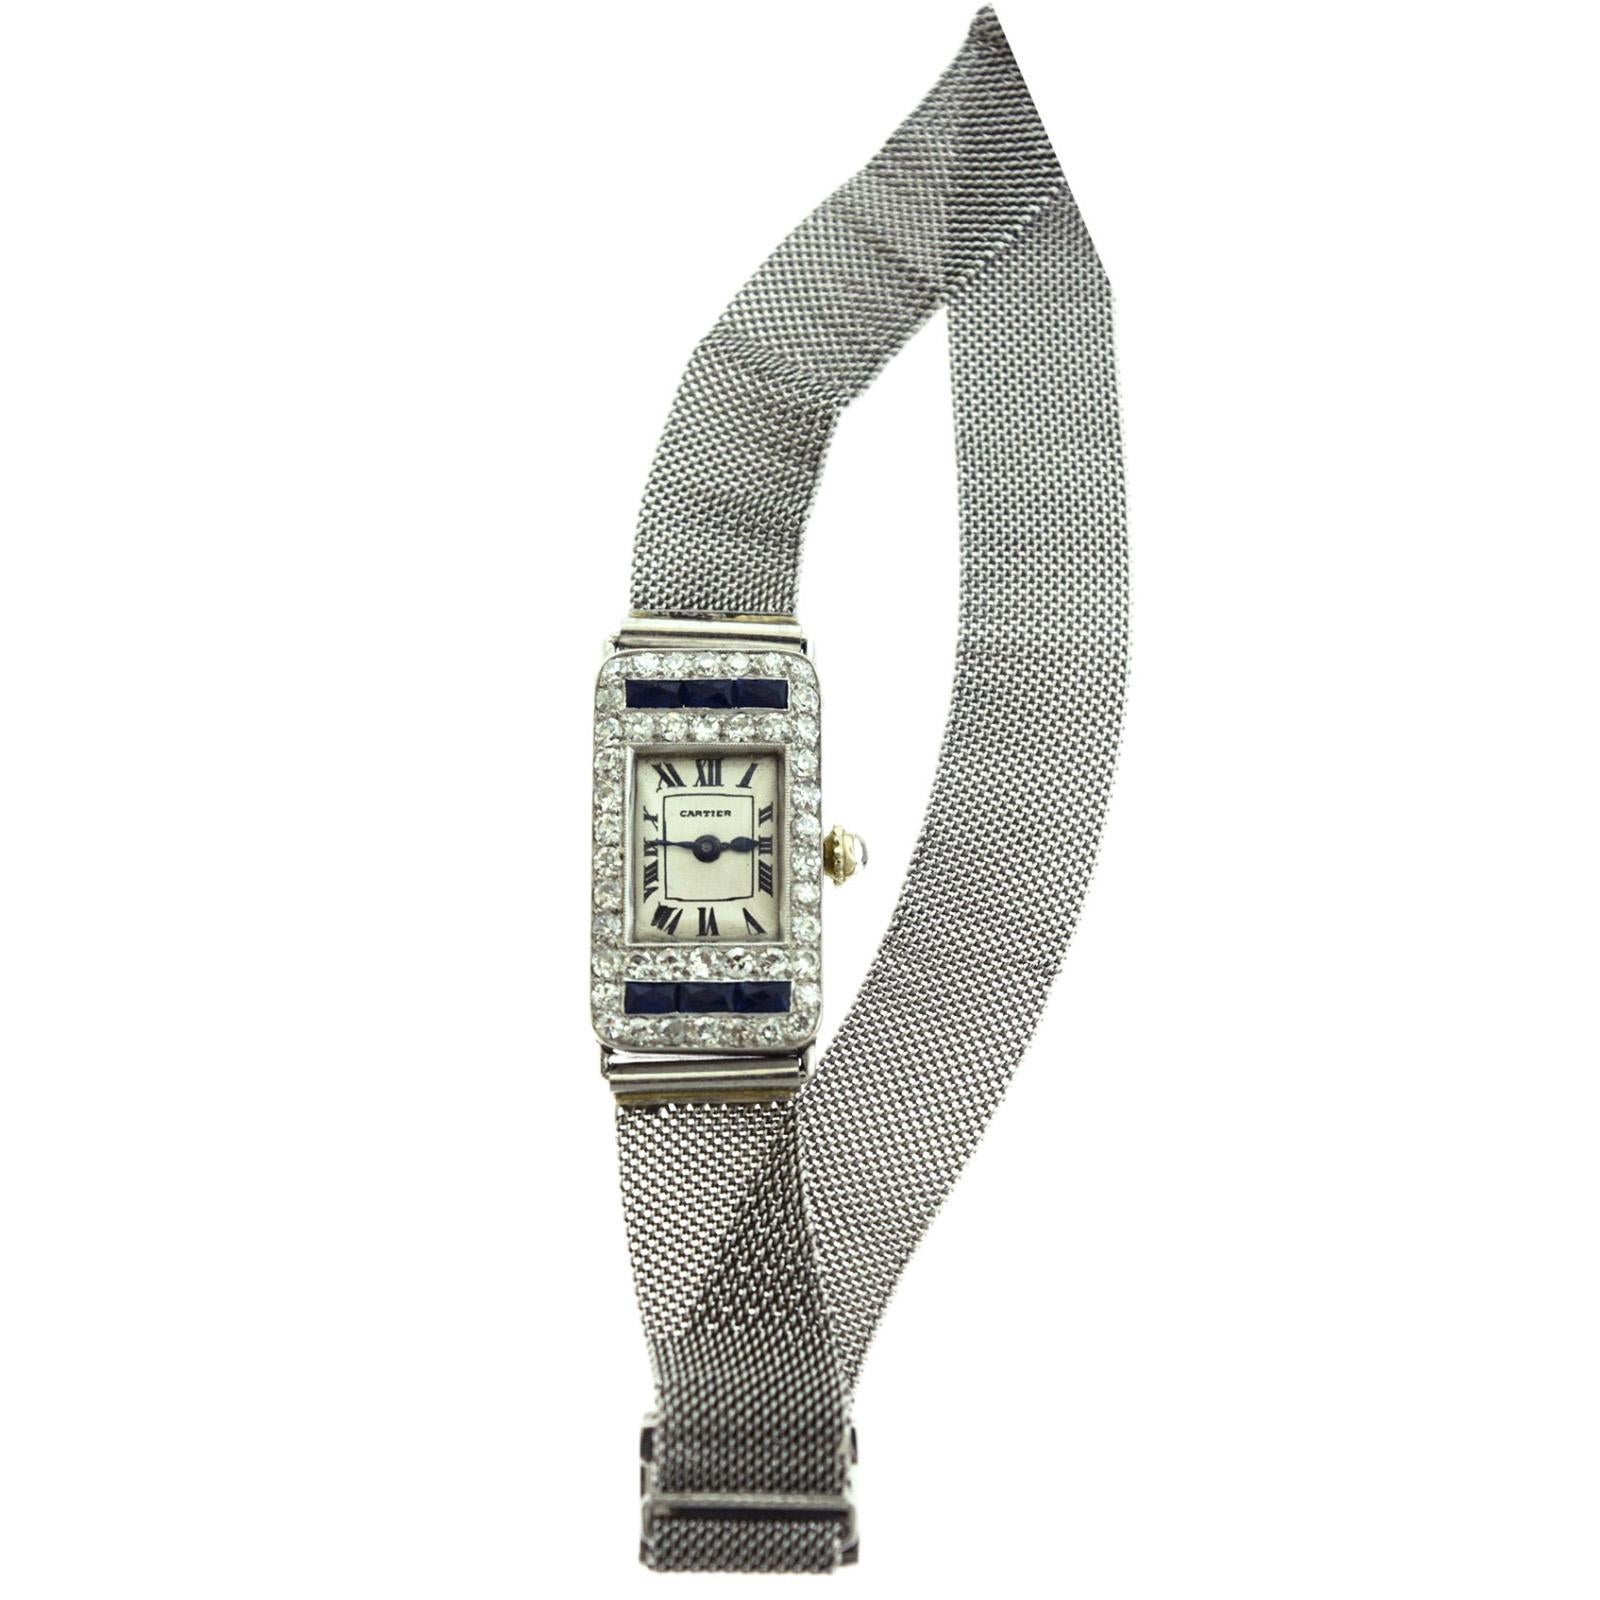 Brilliance Jewels, Miami
Questions? Call Us Anytime!
786,482,8100

Designer: Cartier

Style: Watch

Metal: Platinum

Metal Purity: 950

Stones: Round Diamonds, Sapphires​​​​​​​

Total Item Weight (grams): 16.4 (watch)

Watch Dimensions: 1.10 inches